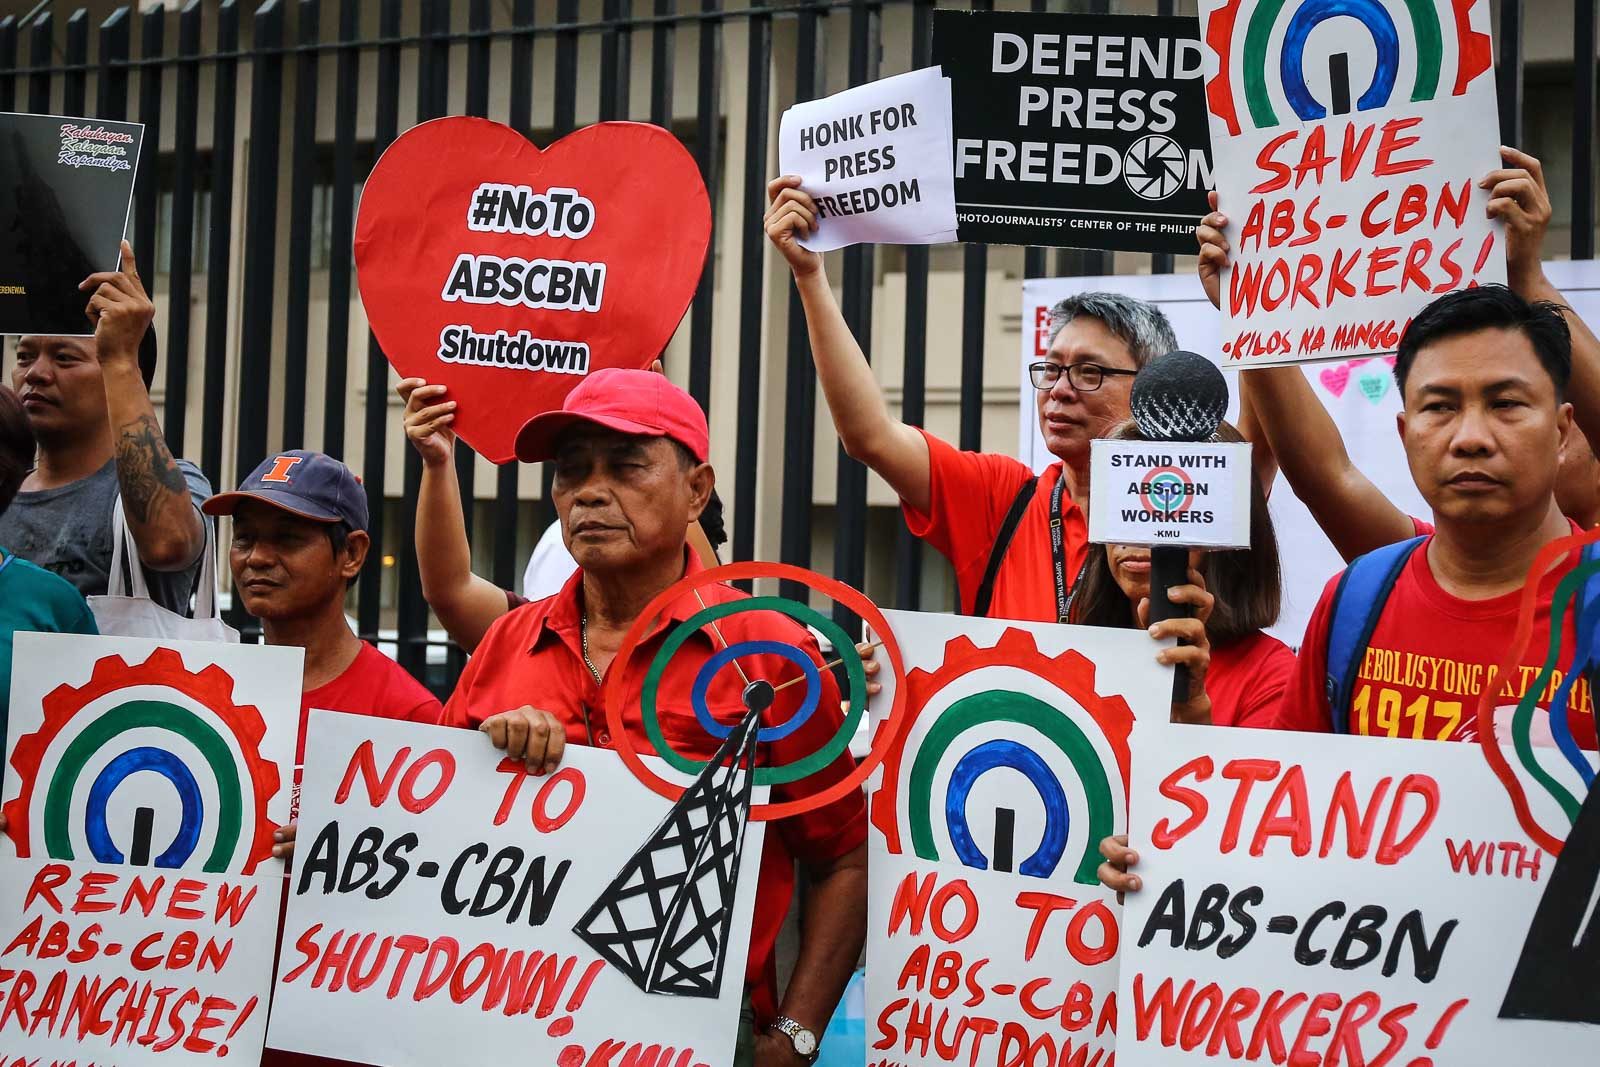 ‘Show of love for democracy’: Groups hold Red Friday protest to support ABS-CBN